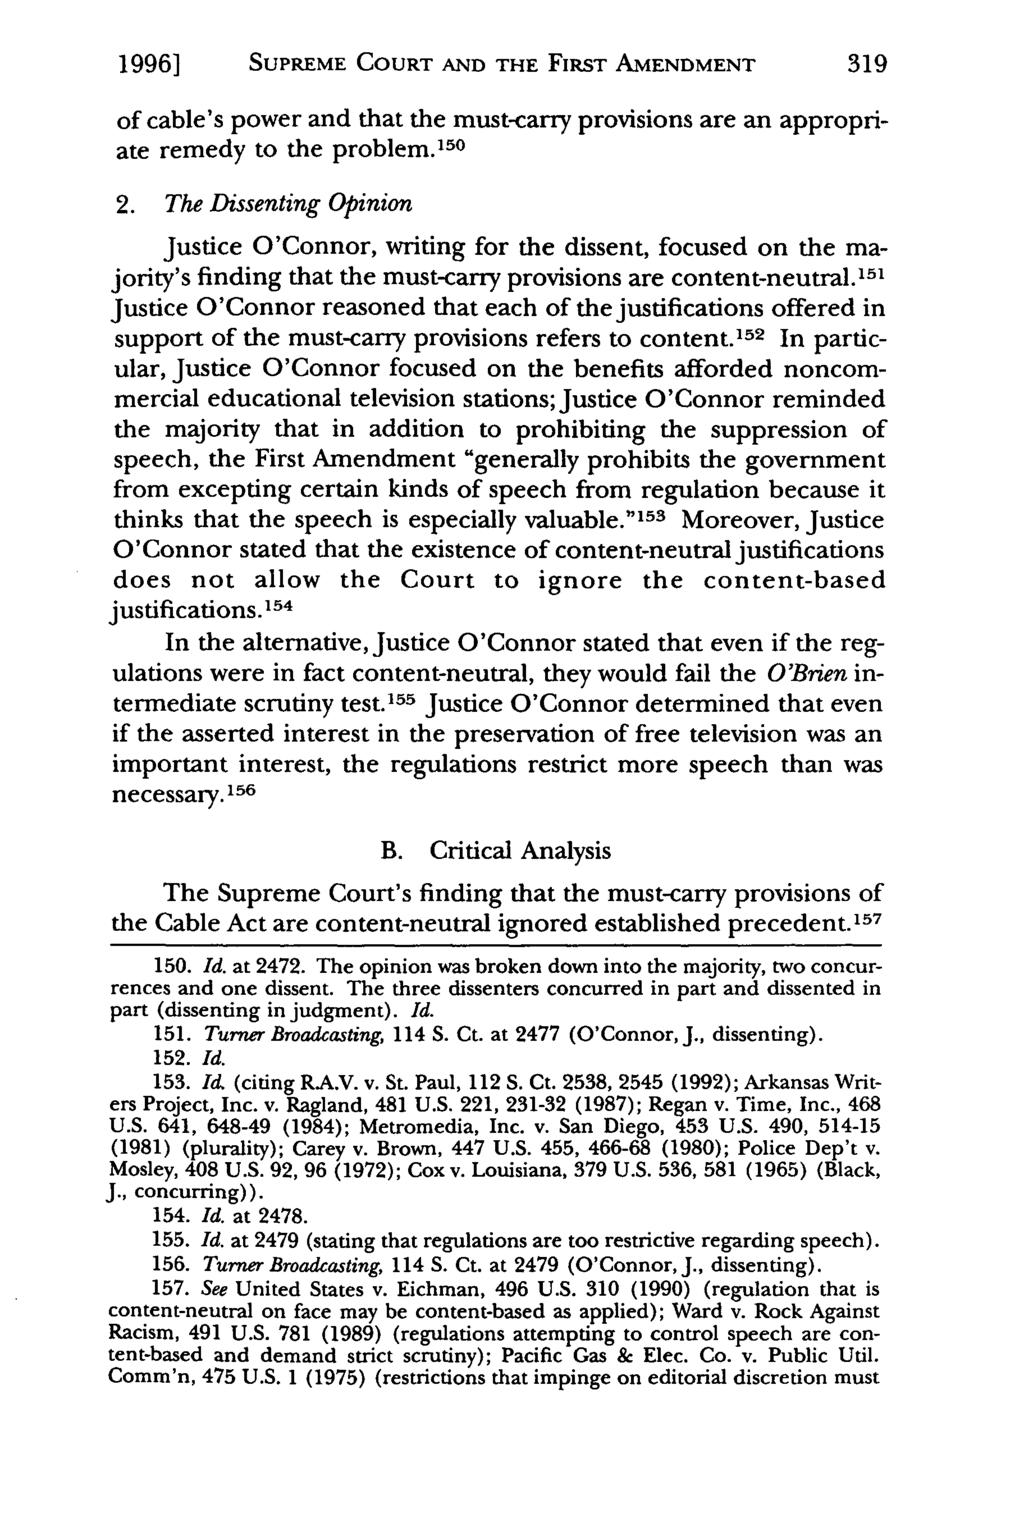 1996] Sands: SUPREME The Supreme COURT Court Turns AND Its Back THE on FIRST the First AMENDMENT Amendment, the 1992 of cable's power and that the must-carry provisions are an appropriate remedy to